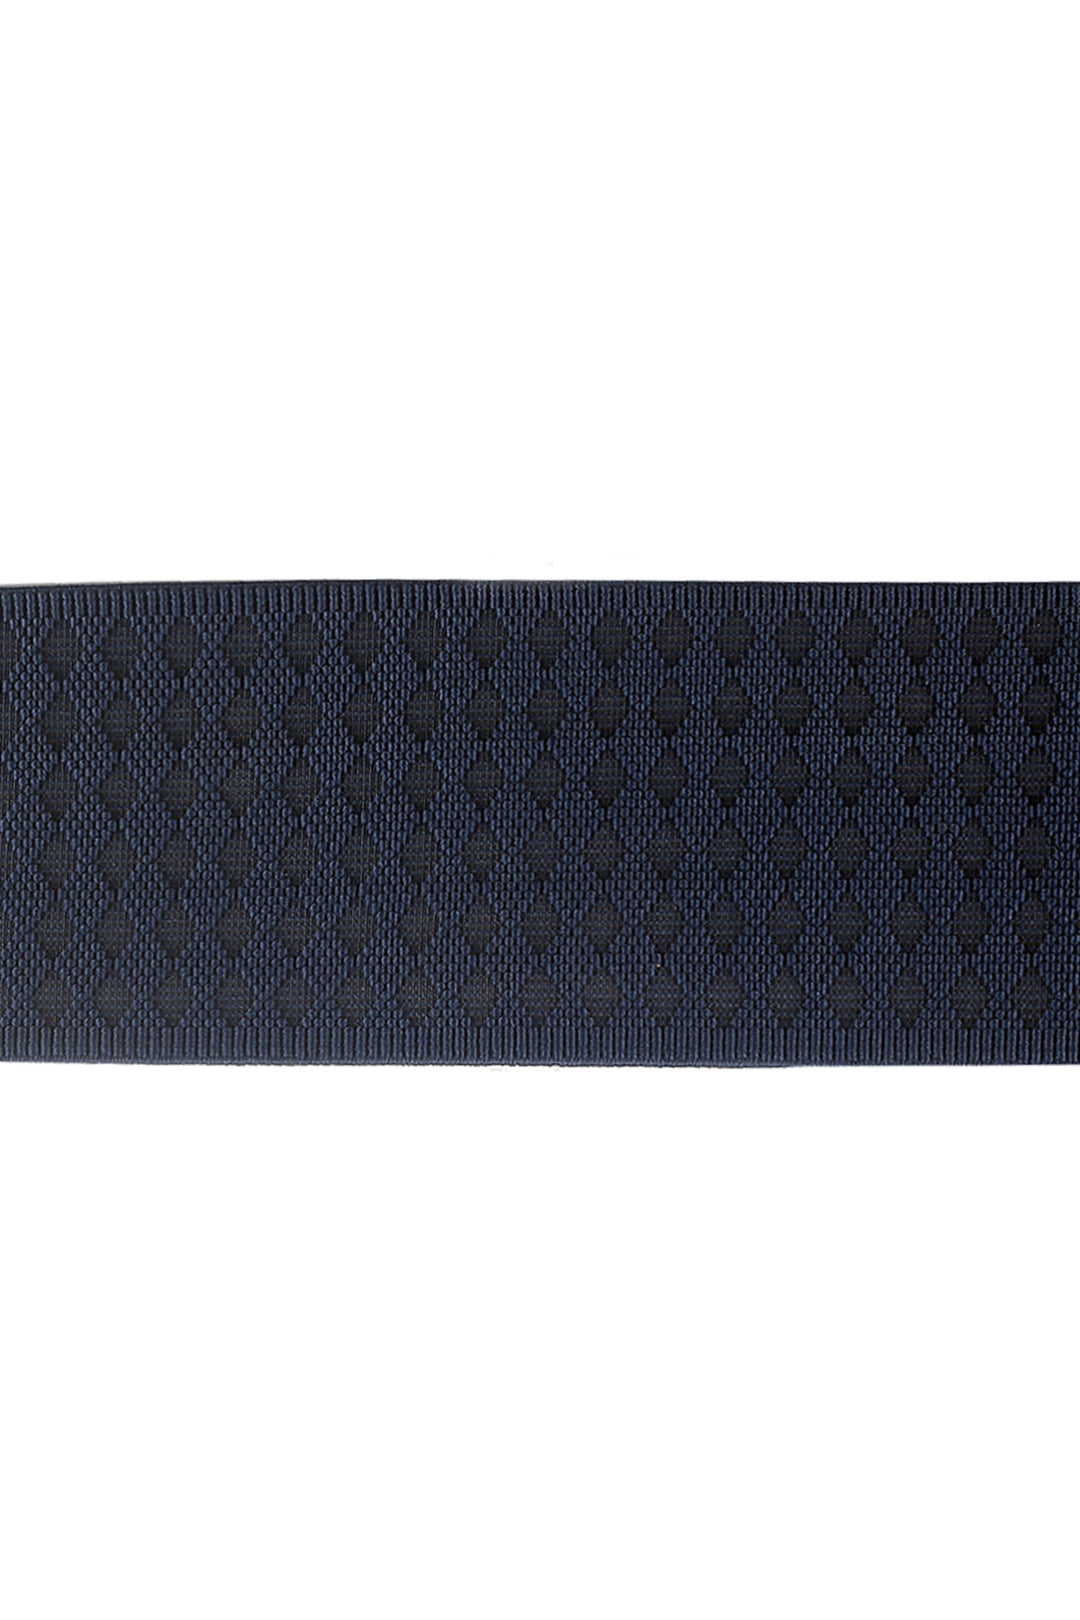 Knit Elastic Webbing Strap Band Strong Stretchable Elastic in Navy Blue Color